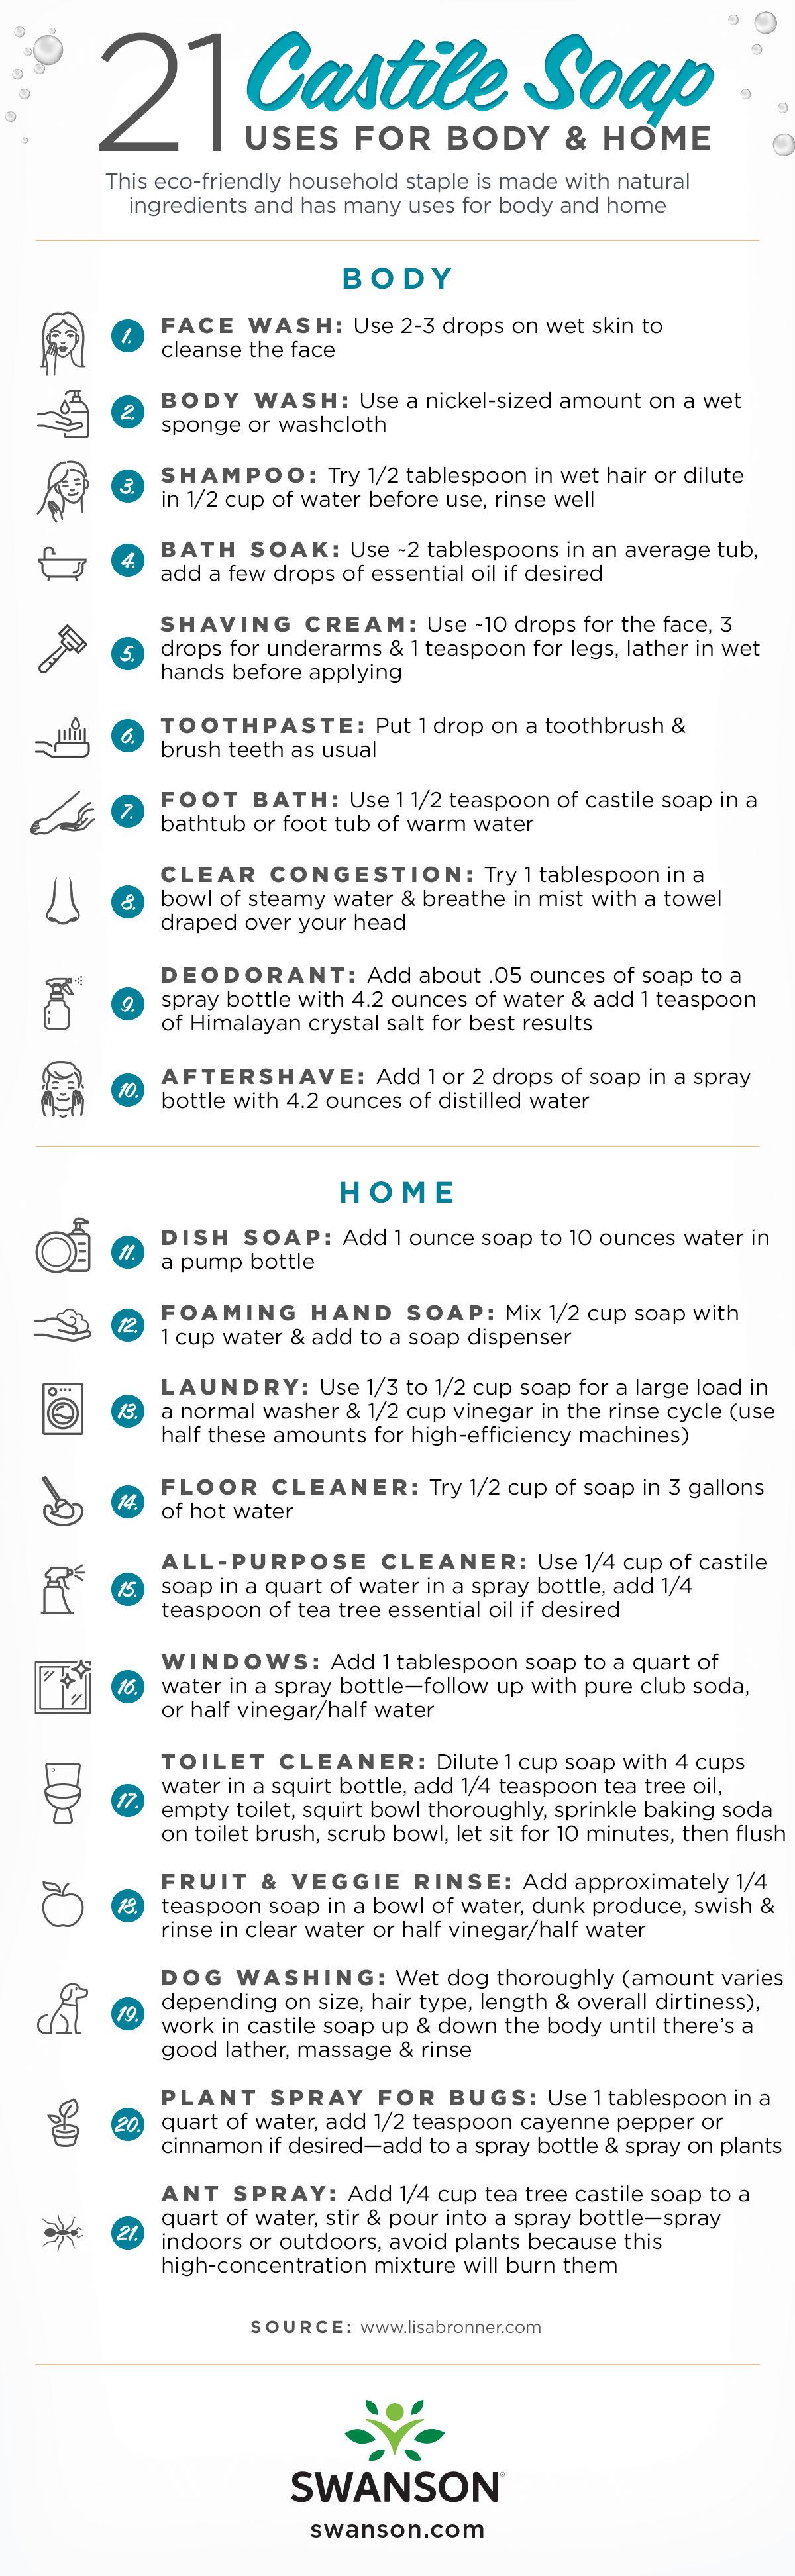 21 Uses for Castile Soap Infographic